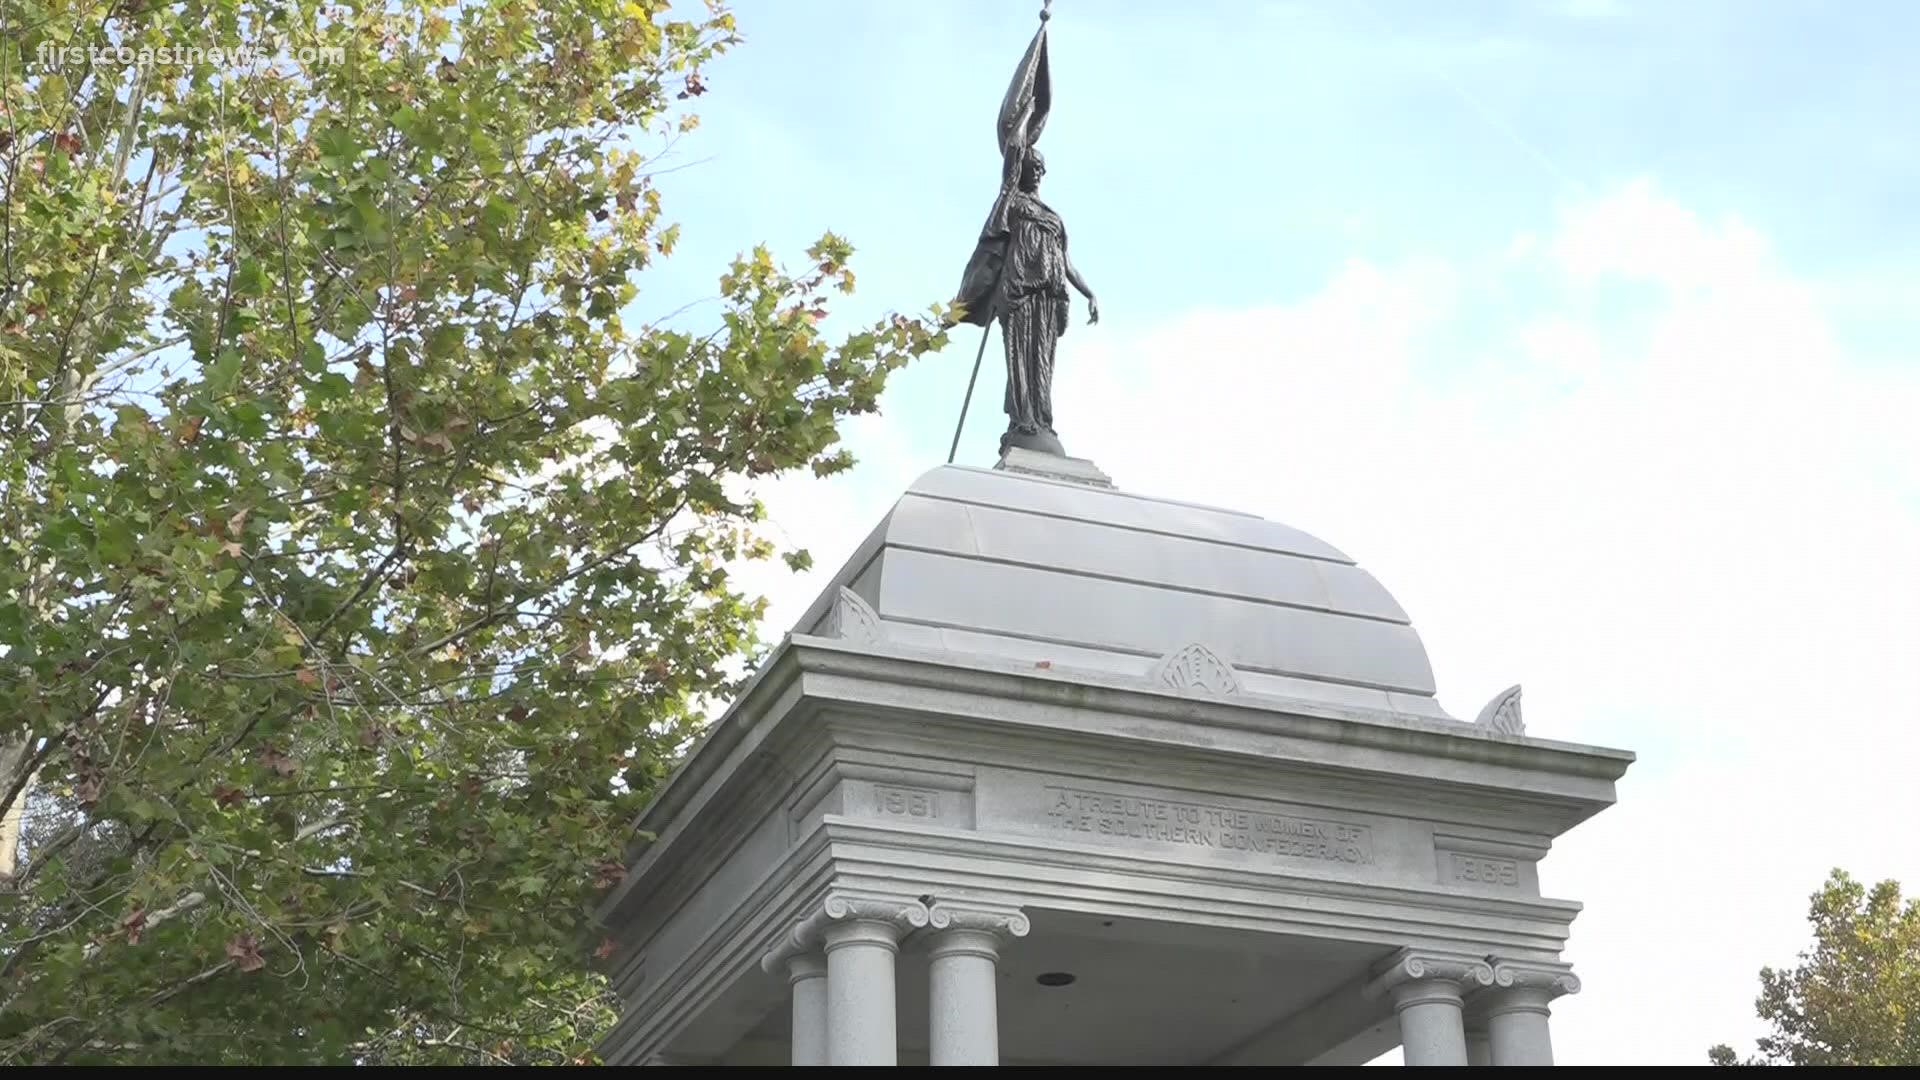 Following its November failure to remove Jacksonville's most prominent Confederate tribute, City Council prepares for renewed debate.